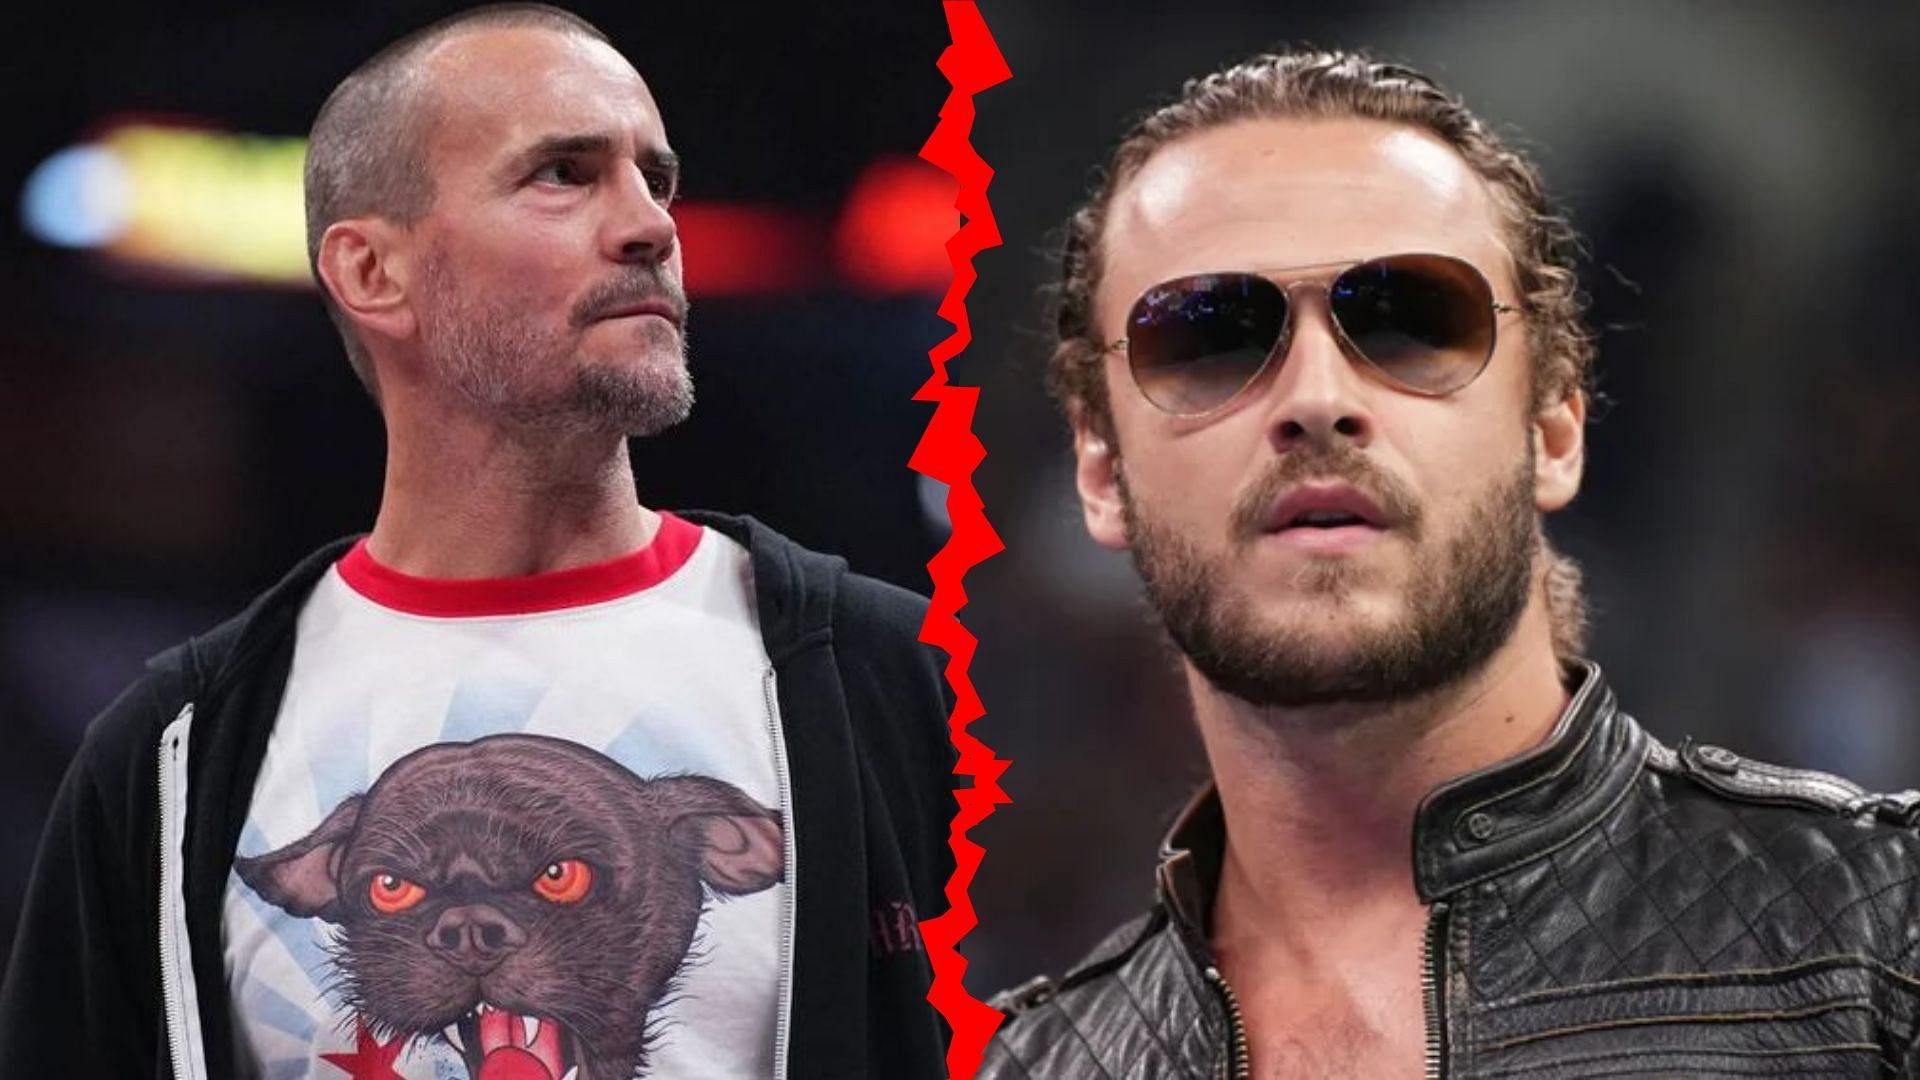 CM Punk and Jack Perry indulged in a backstage altercation at All In 